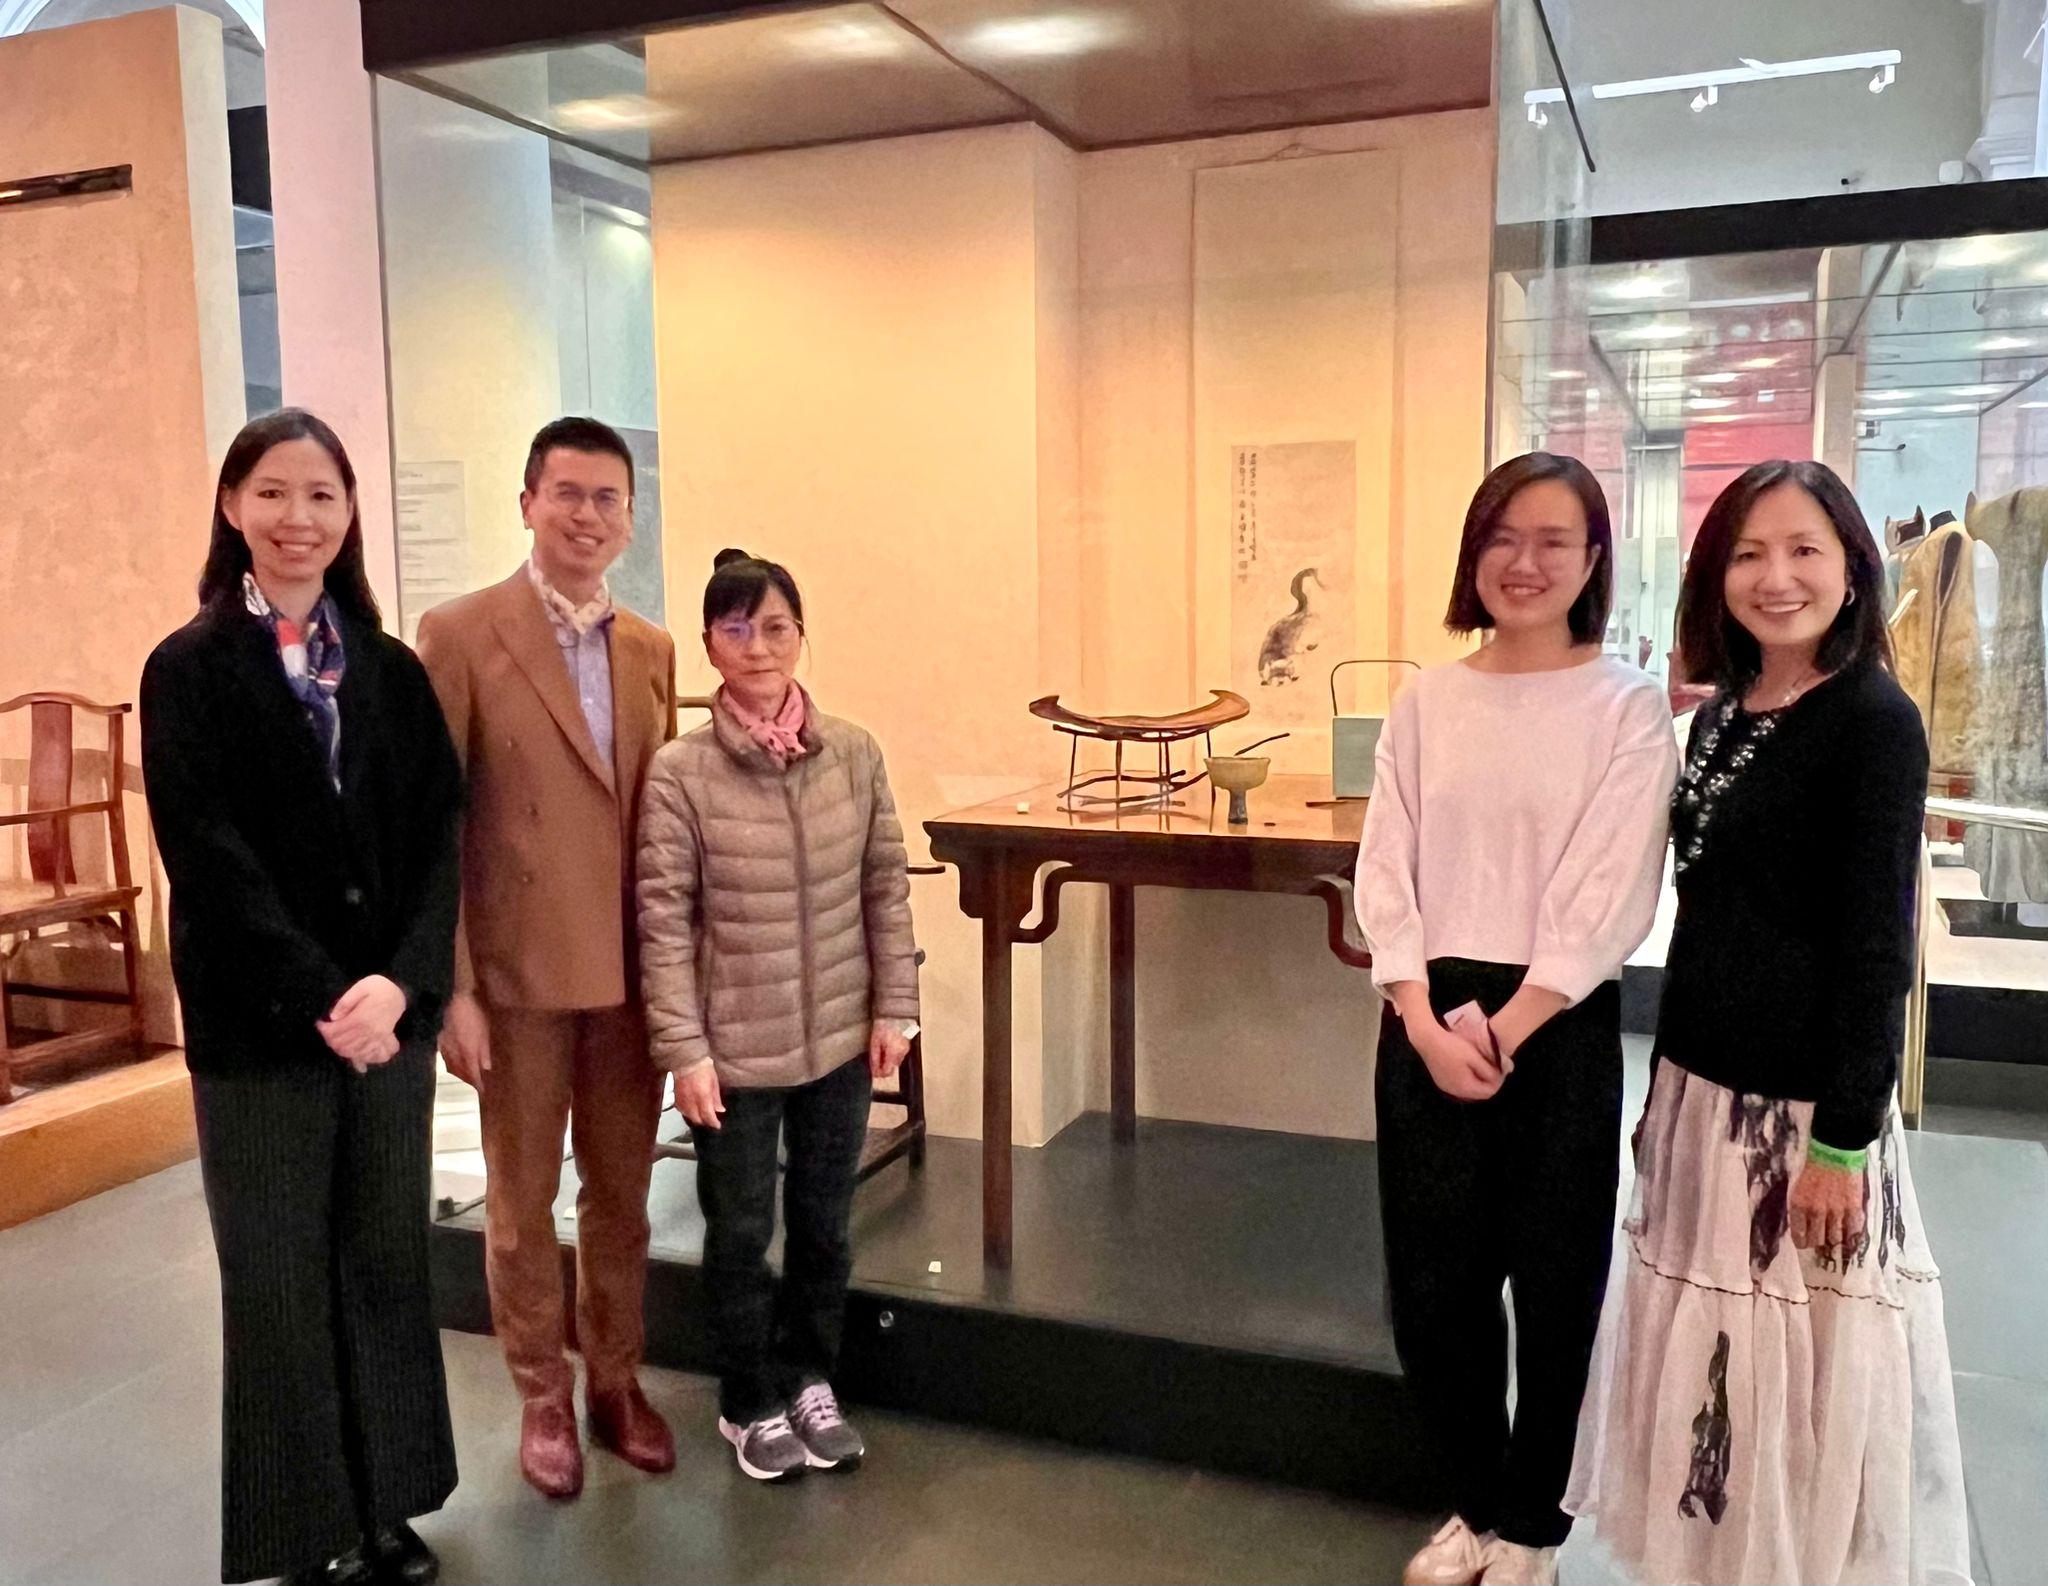 The Hong Kong Economic and Trade Office, London (London ETO), supported Crafts on Peel, a charitable organisation in Hong Kong, to join the London Craft Week for the third year. Photo shows (from left to right) Crafts on Peel’s Creative Director, Ms Penelope Luk; the Director-General of London ETO, Mr Gilford Law; artisan Ms Lau Mei-yee; Curator of the Victoria and Albert Museum Ms Li Xiaoxin; and Crafts on Peel’s founder, Ms Yama Chan, at the Victoria and Albert Museum on May 11 (London time).